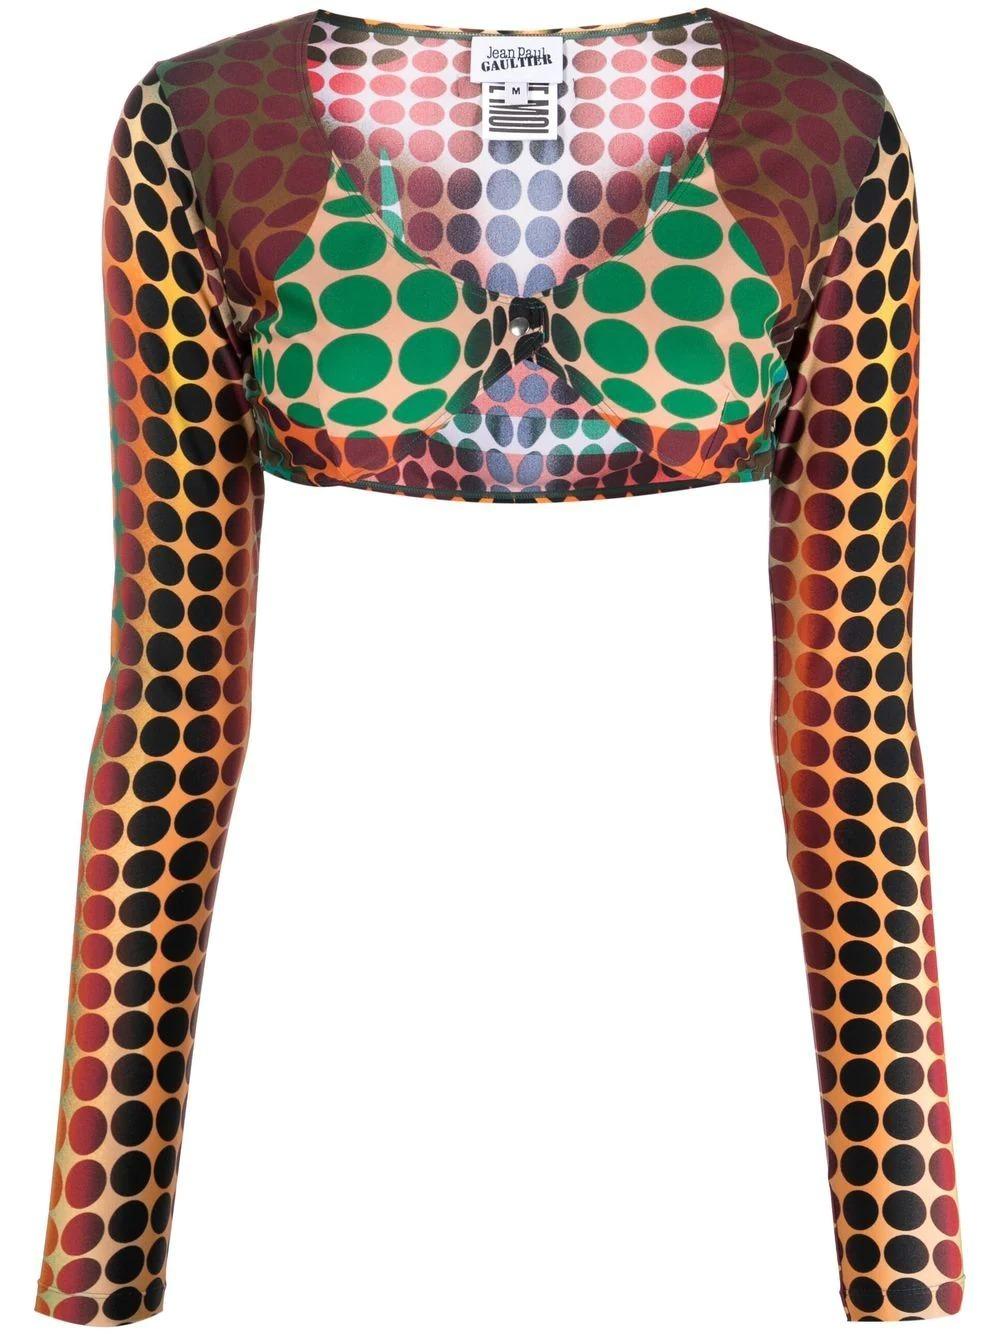 Jean-Paul Gaultier Cyber Psychedelic Dots Dotted Optical Illusion Kendall Jenner Kardashian Runway Multicolor crop top Bustier Bolero

From Jean Paul Gaultier's Cyber collection, this crop top features an iconic print of orange, yellow and brown